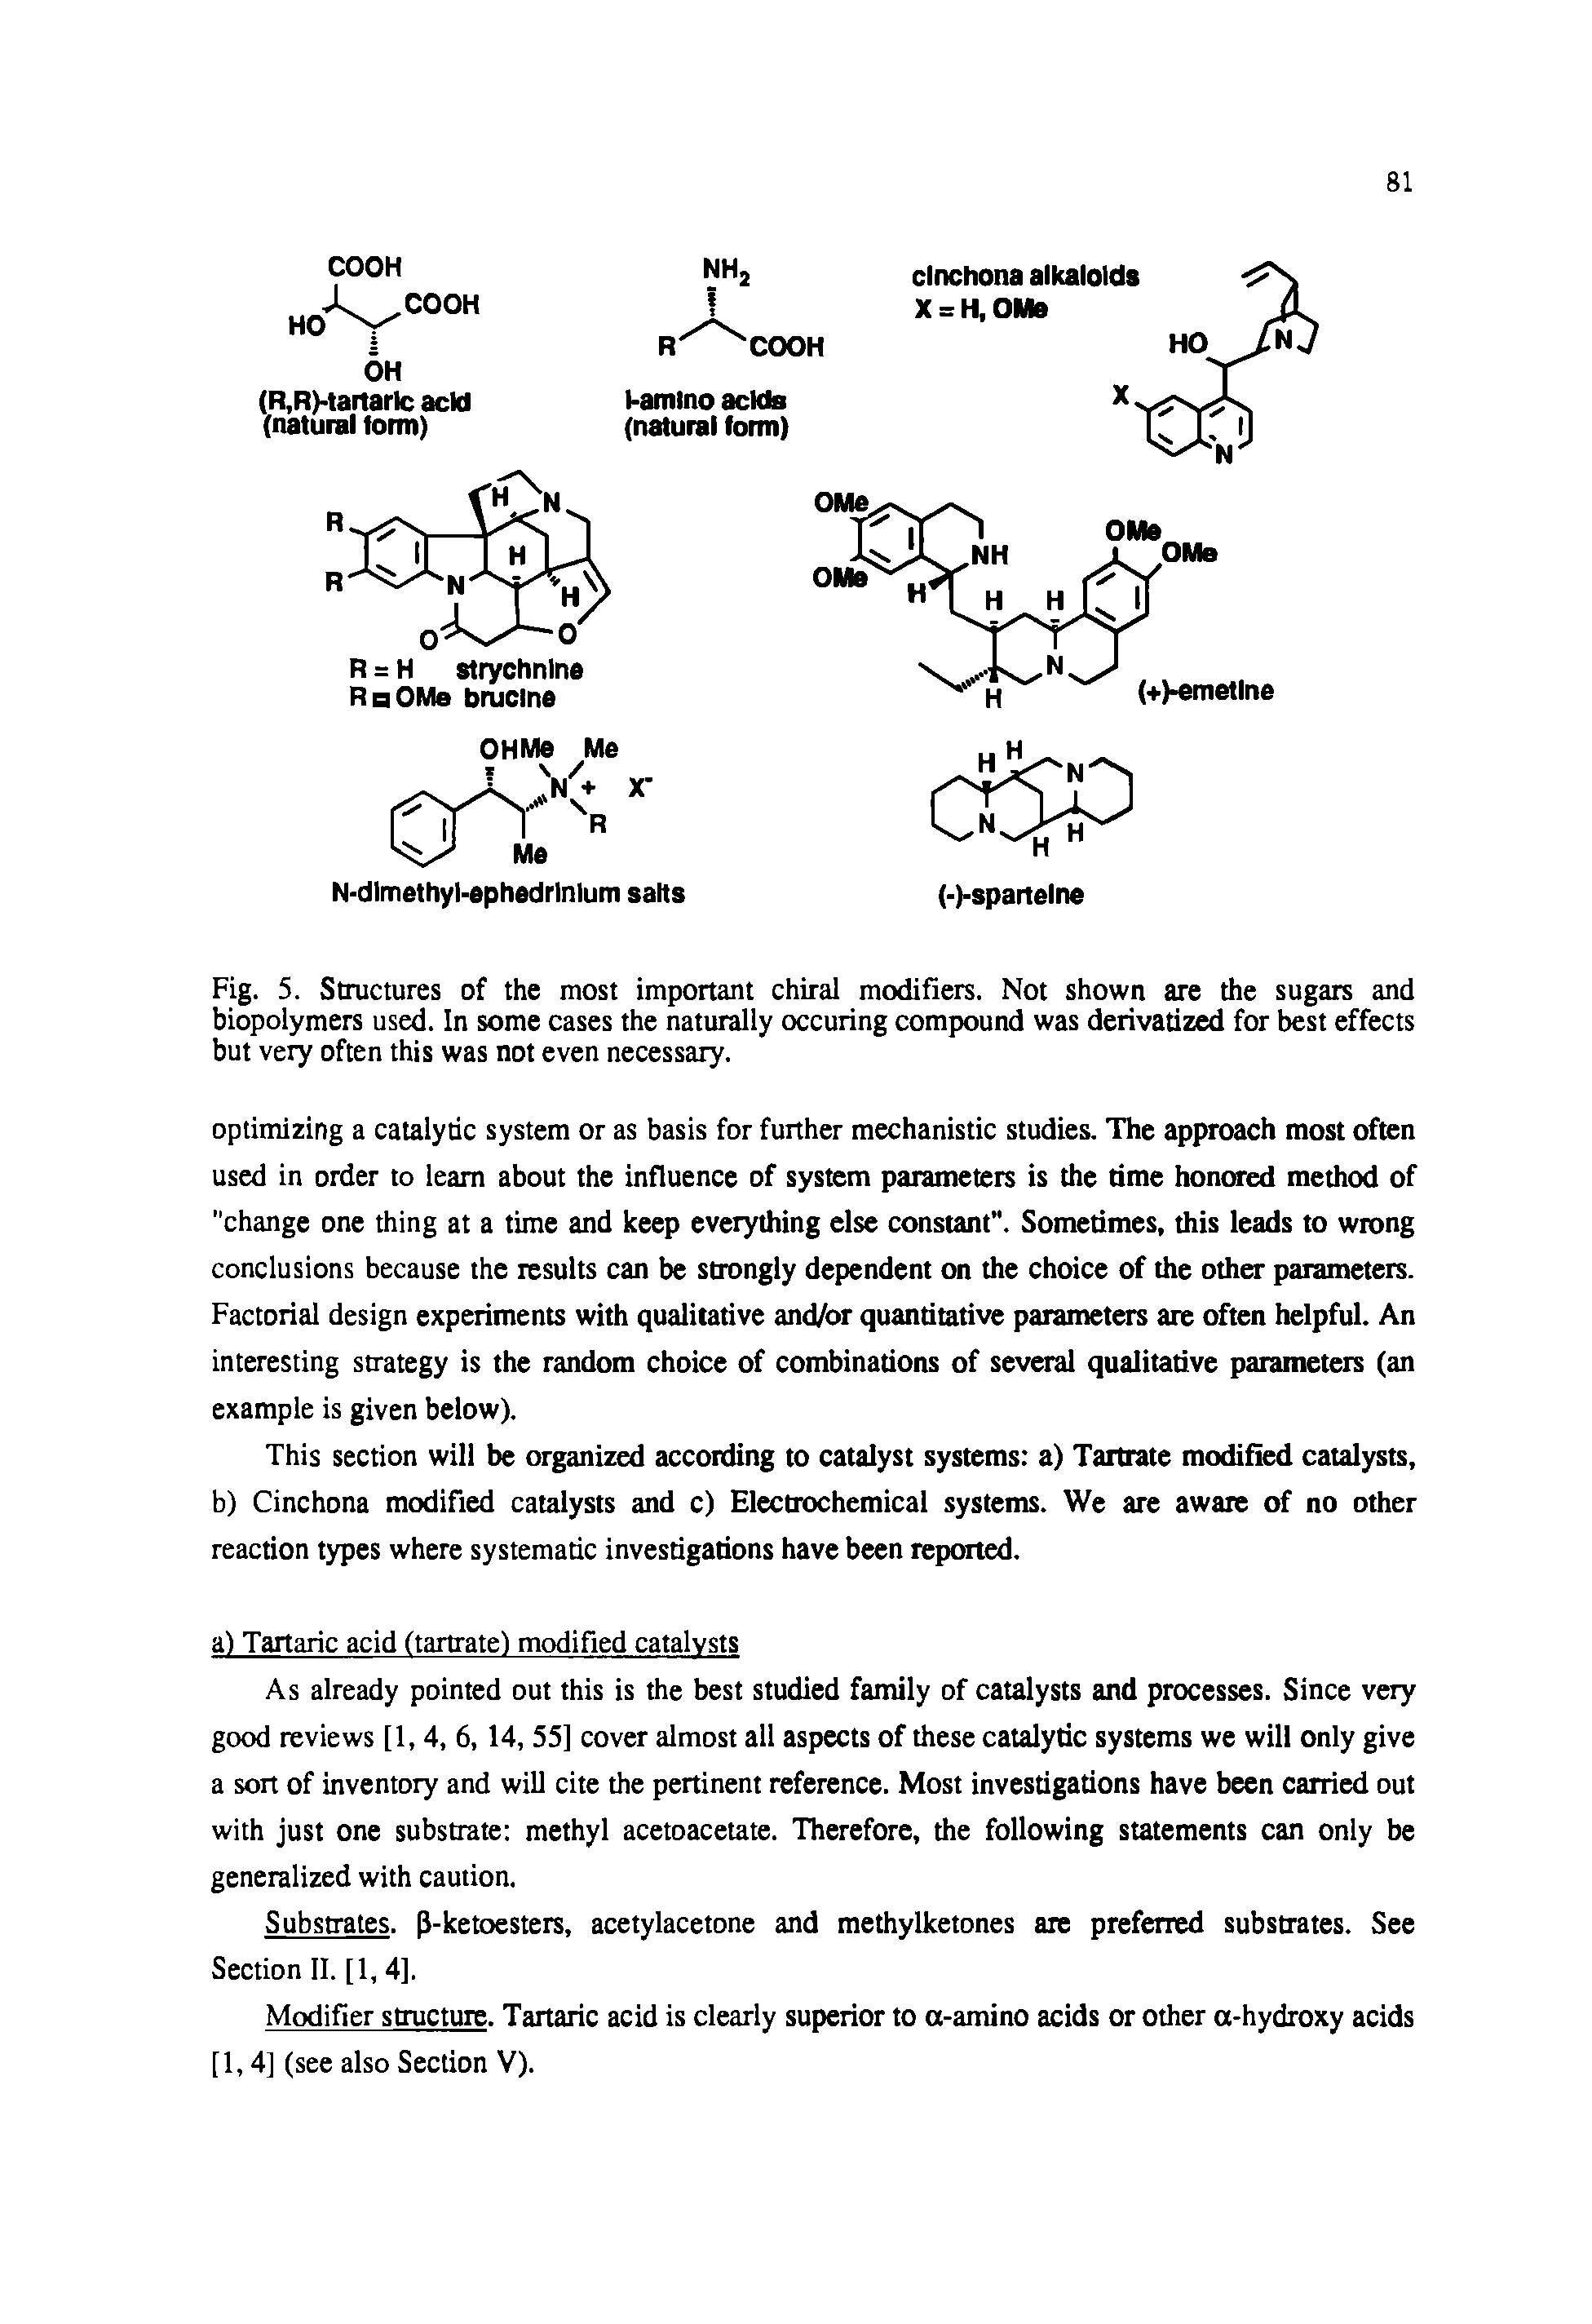 Fig. 5. Structures of the most important chiral modifiers. Not shown are the sugars and biopolymers used. In some cases the naturally occuring compound was derivatized for best effects but very often this was not even necessary.